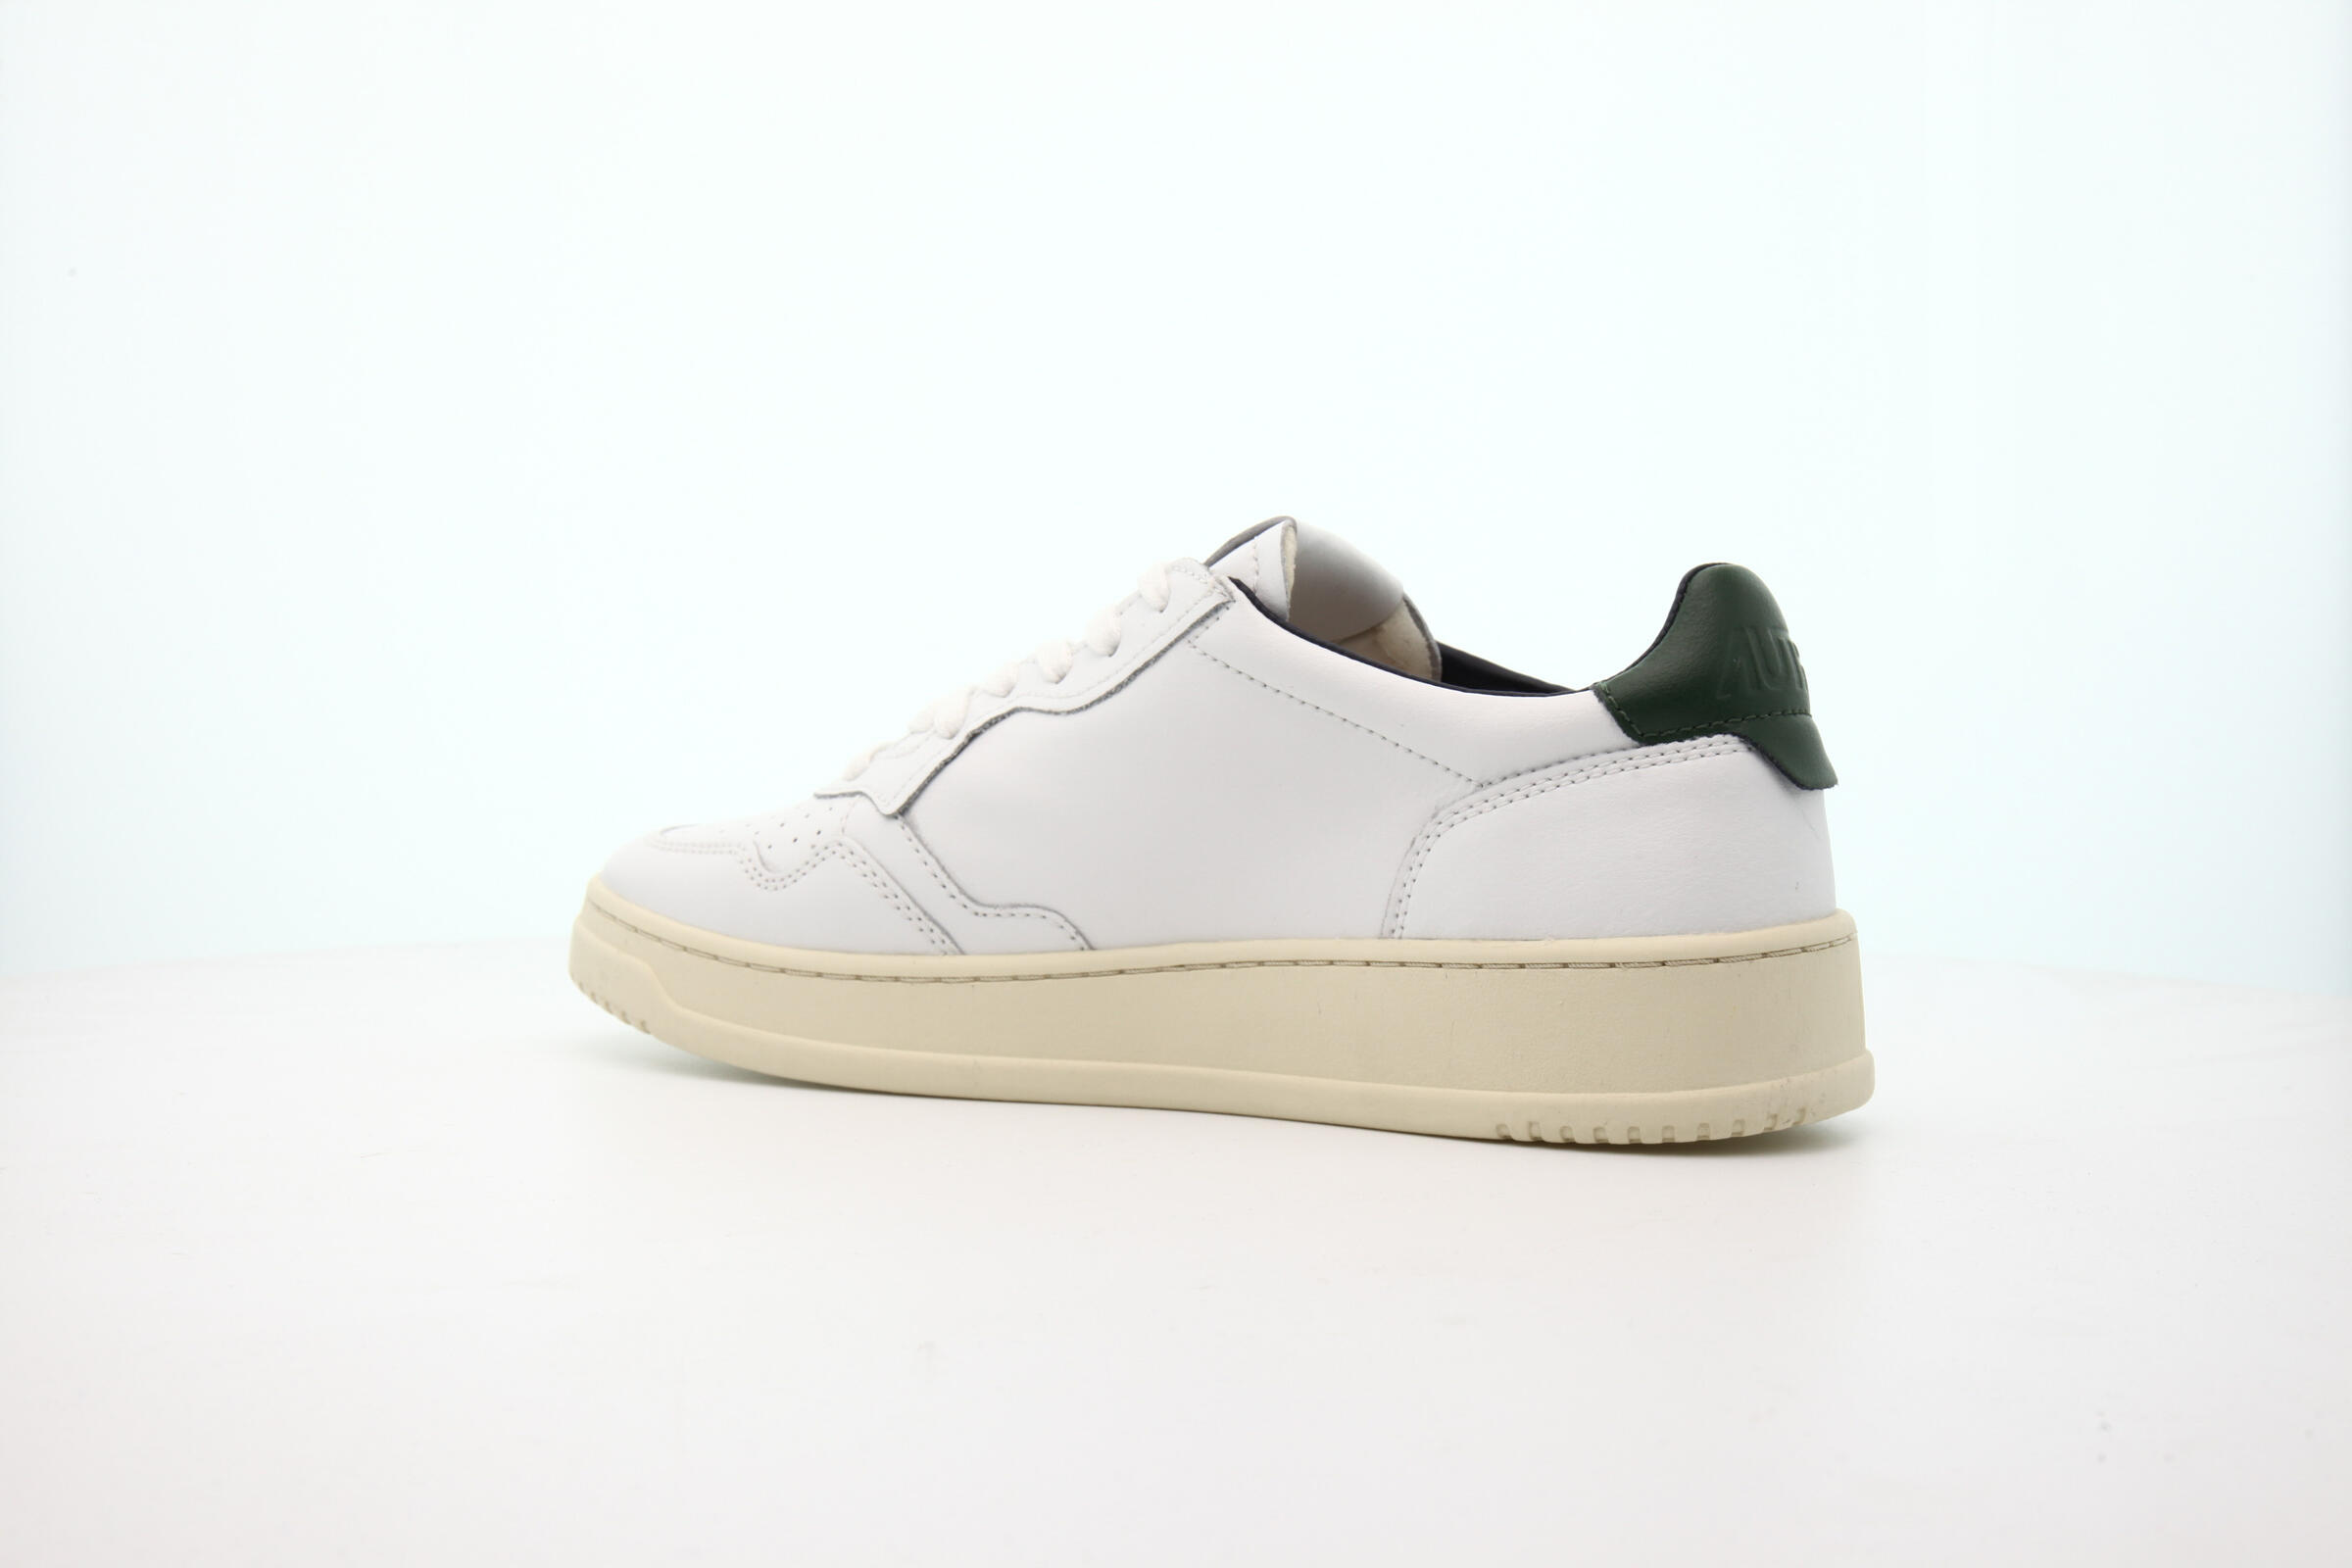 Autry Action Shoes MEDALIST LOW "DARK GREEN"